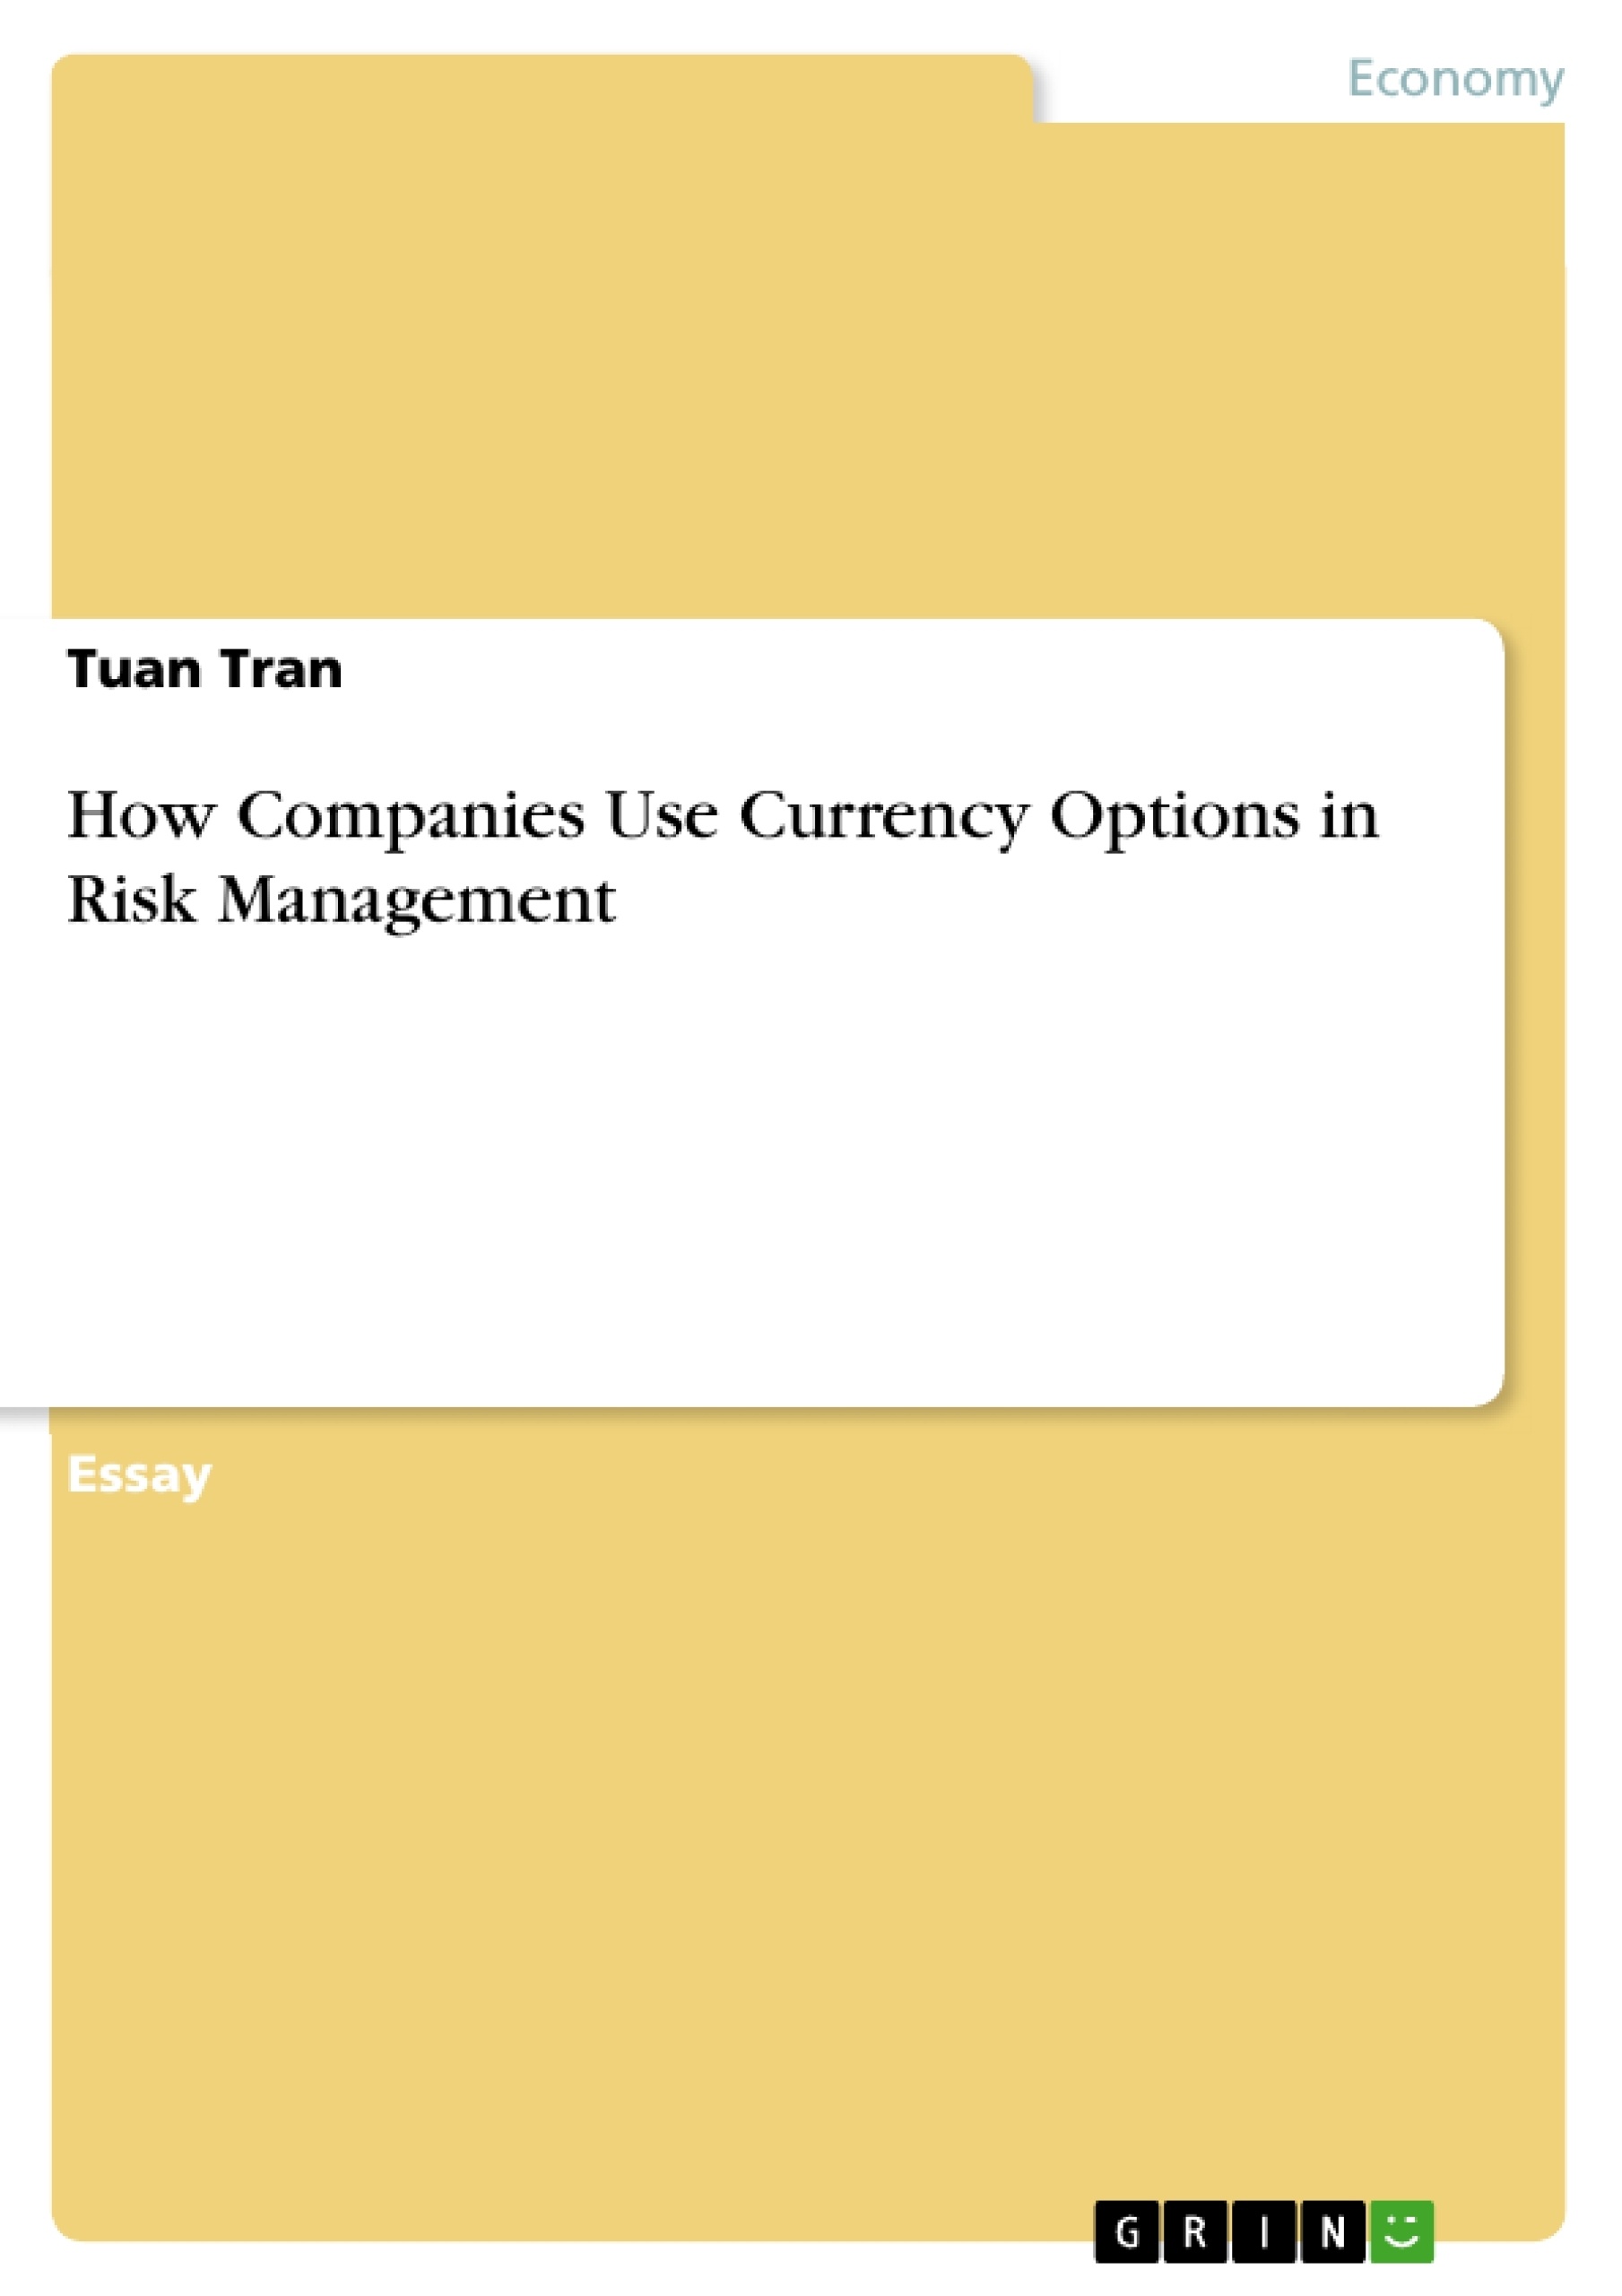 Title: How Companies Use Currency Options in Risk Management